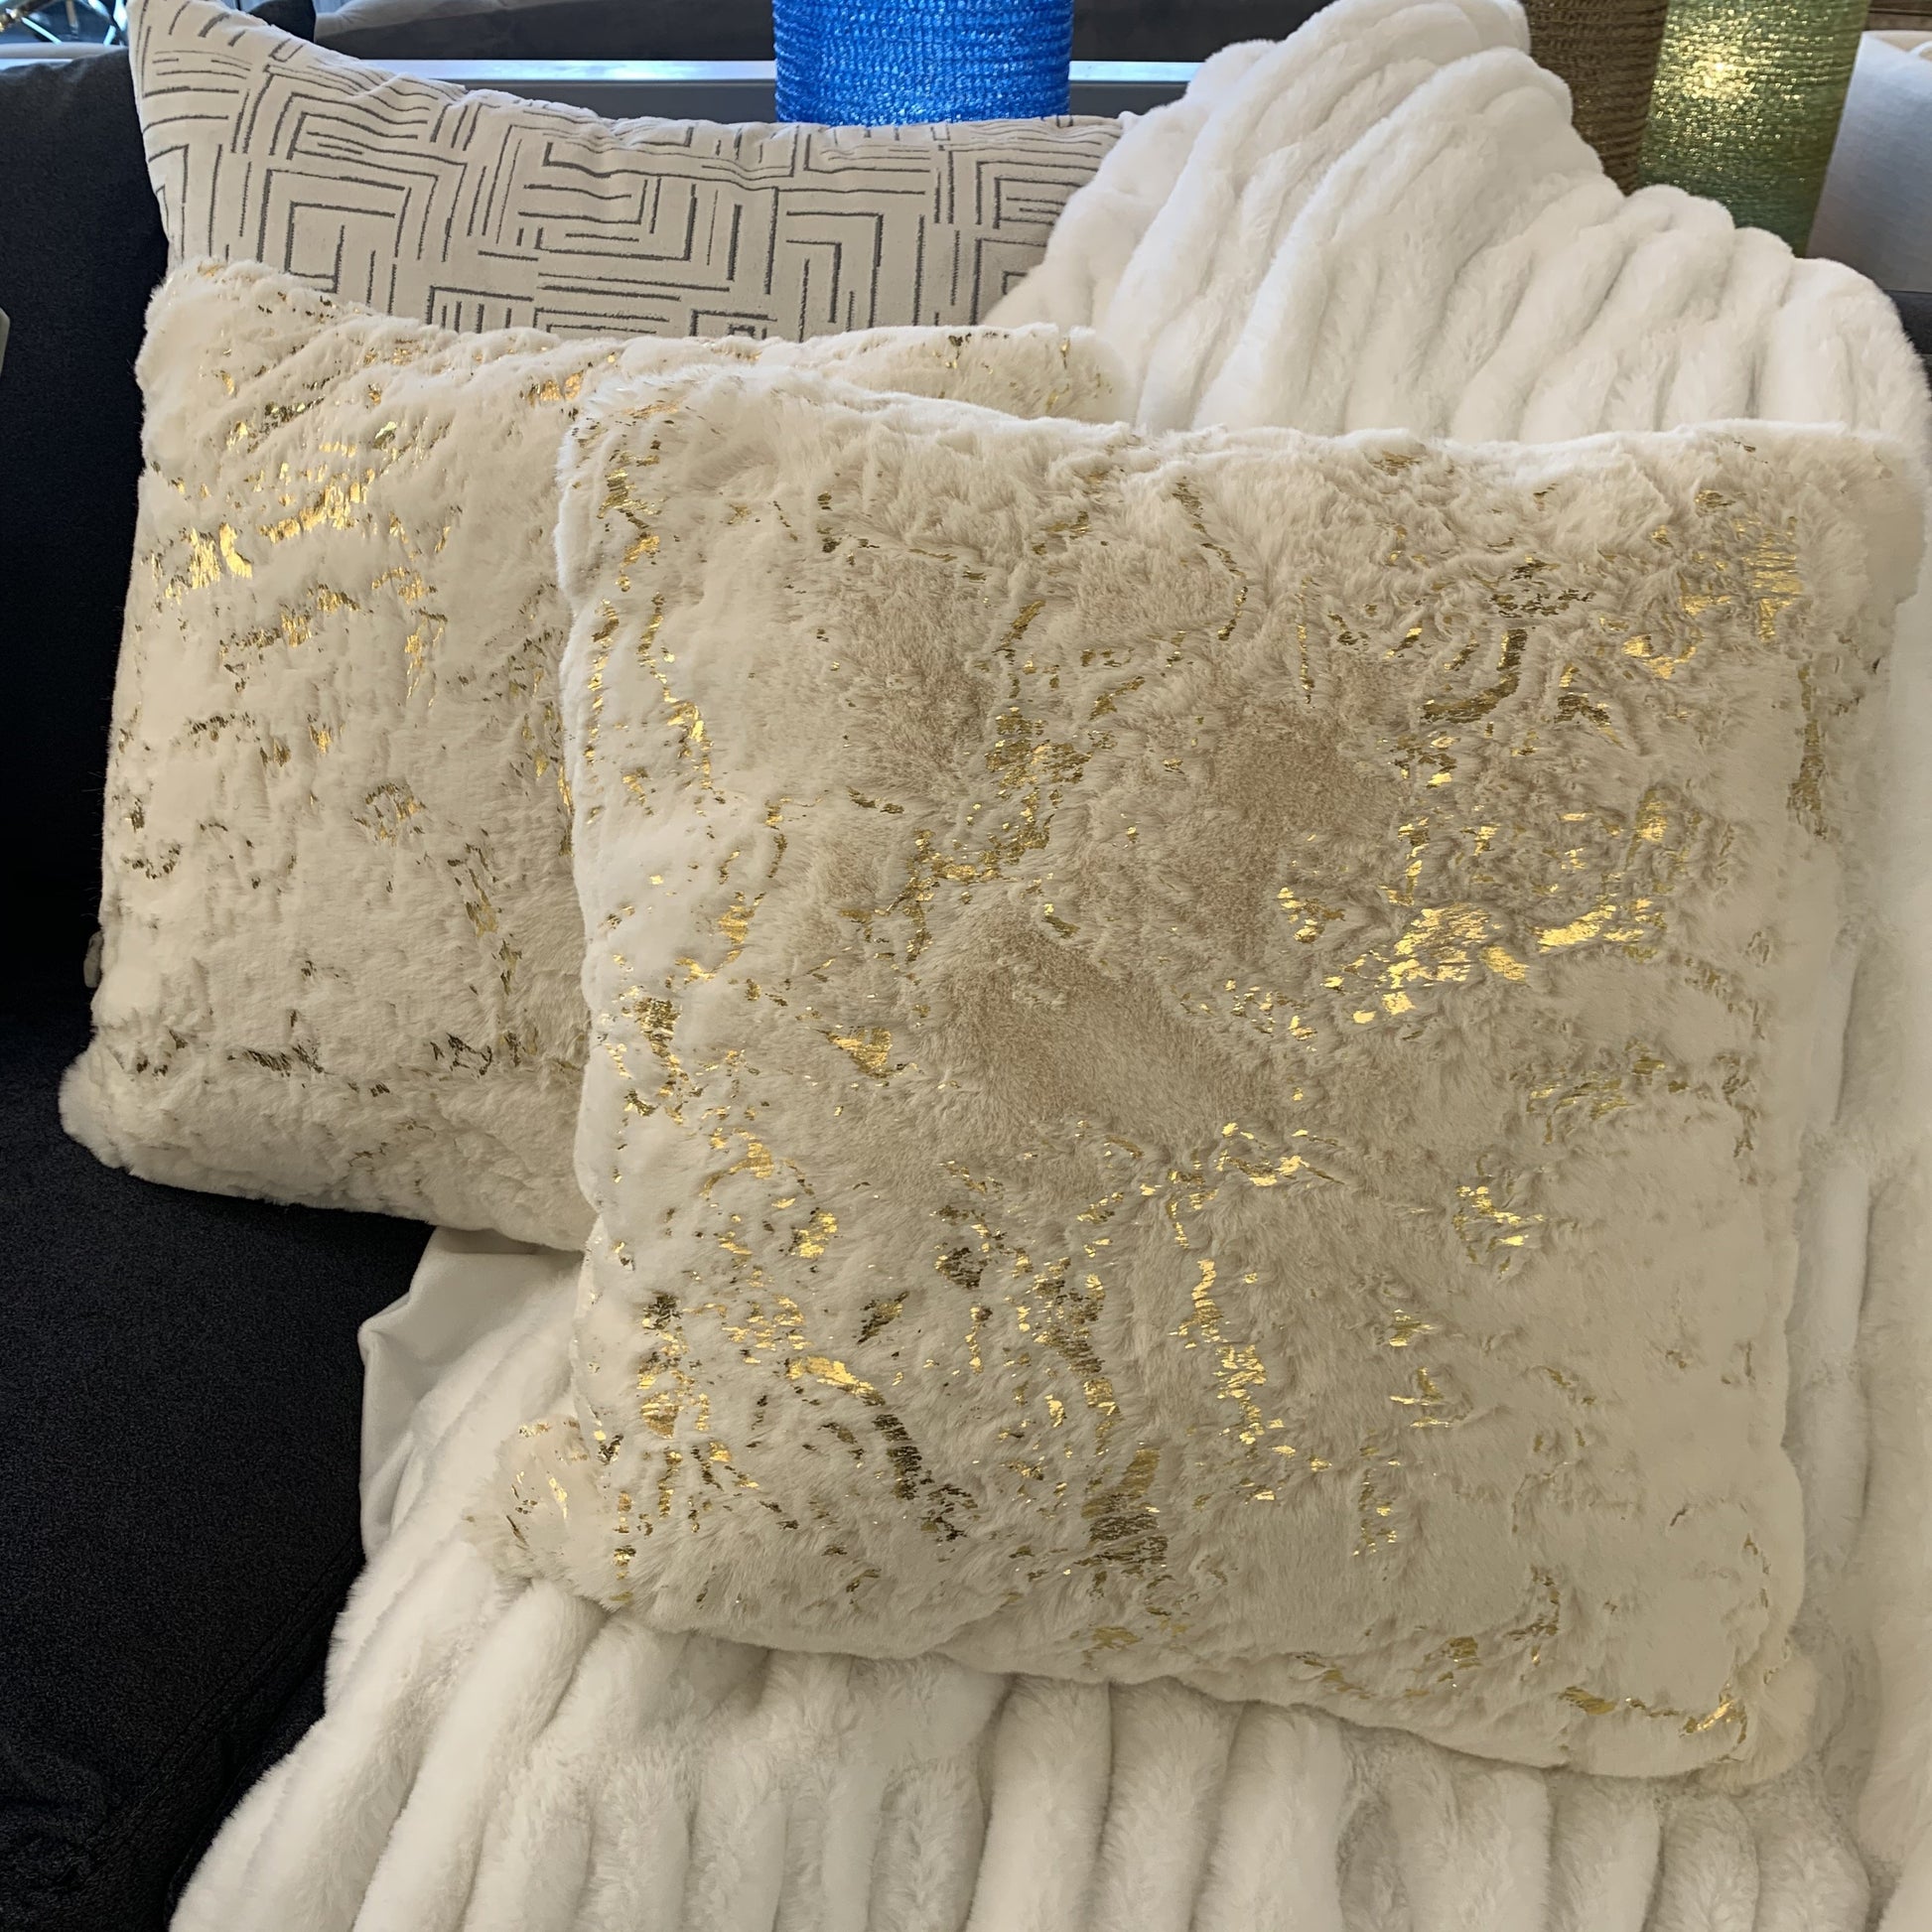 Golden Faux Fur Glow Fluffy Extra Soft Shimmery Foil Illuminating Effect Throw Pillow/Positioner -Metallica Pillow Collection